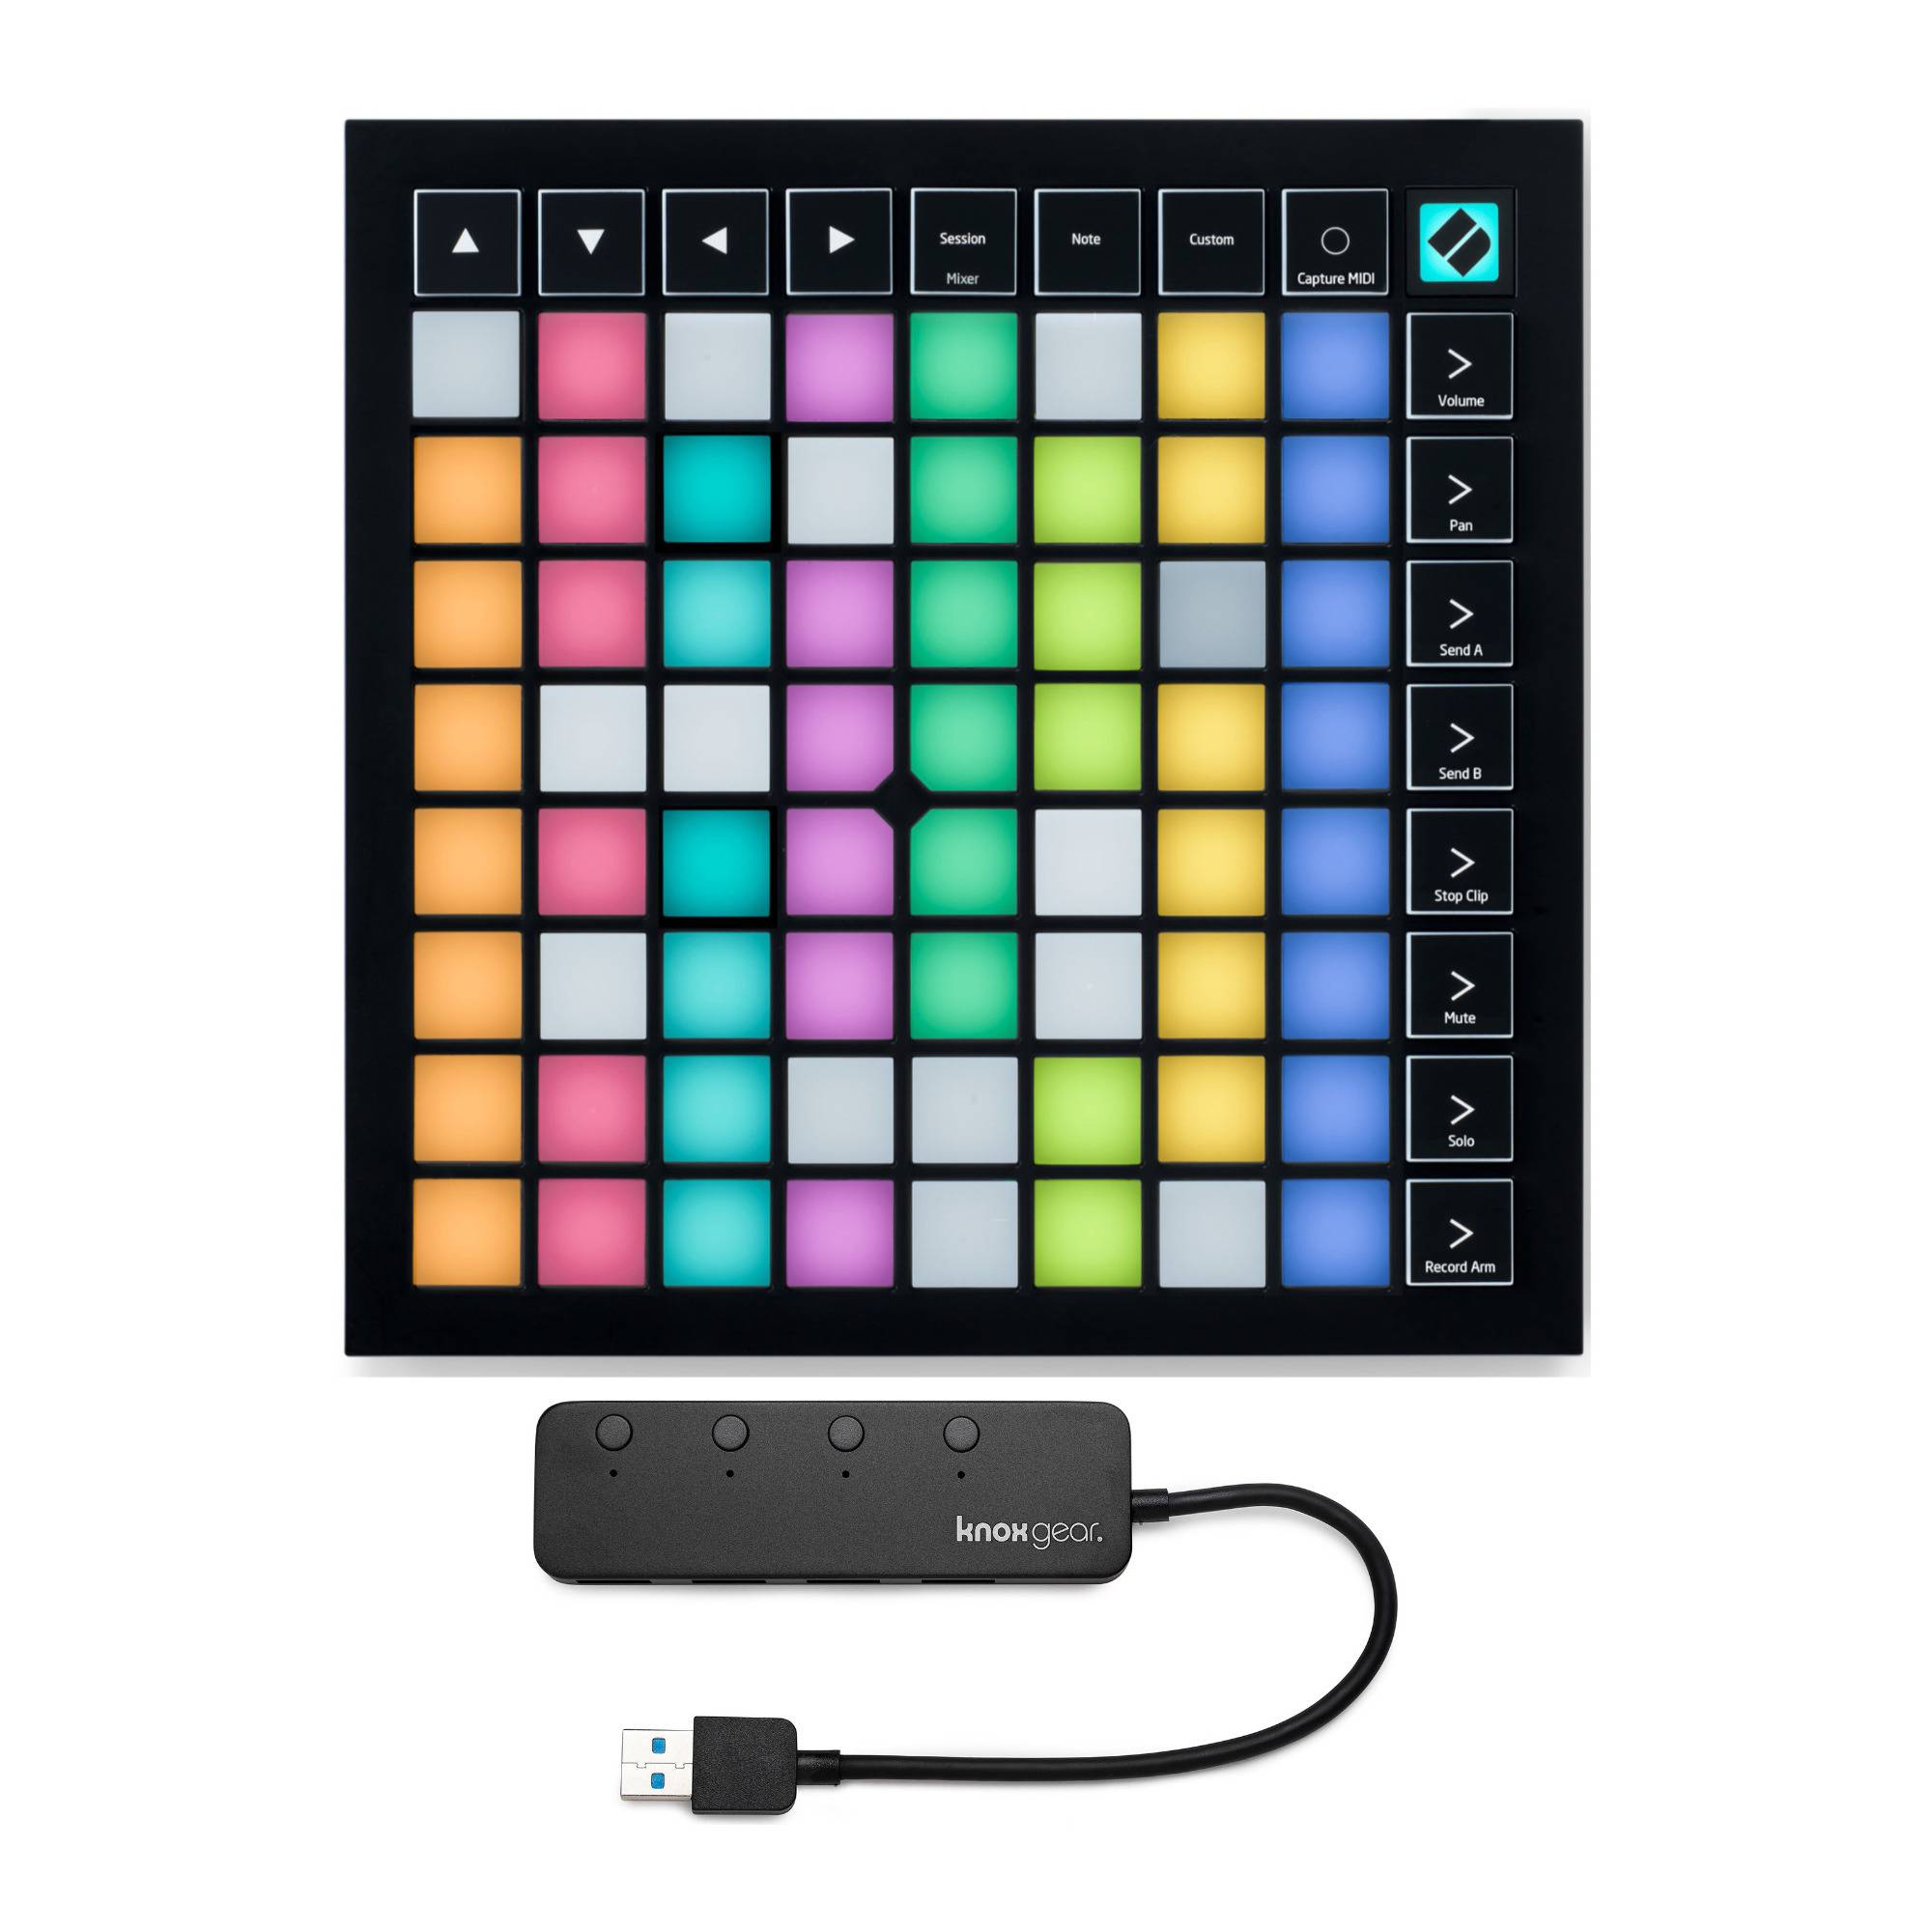 Novation Launchpad X Grid Controller for Ableton Live with Knox 3.0 4 Port USB HUB